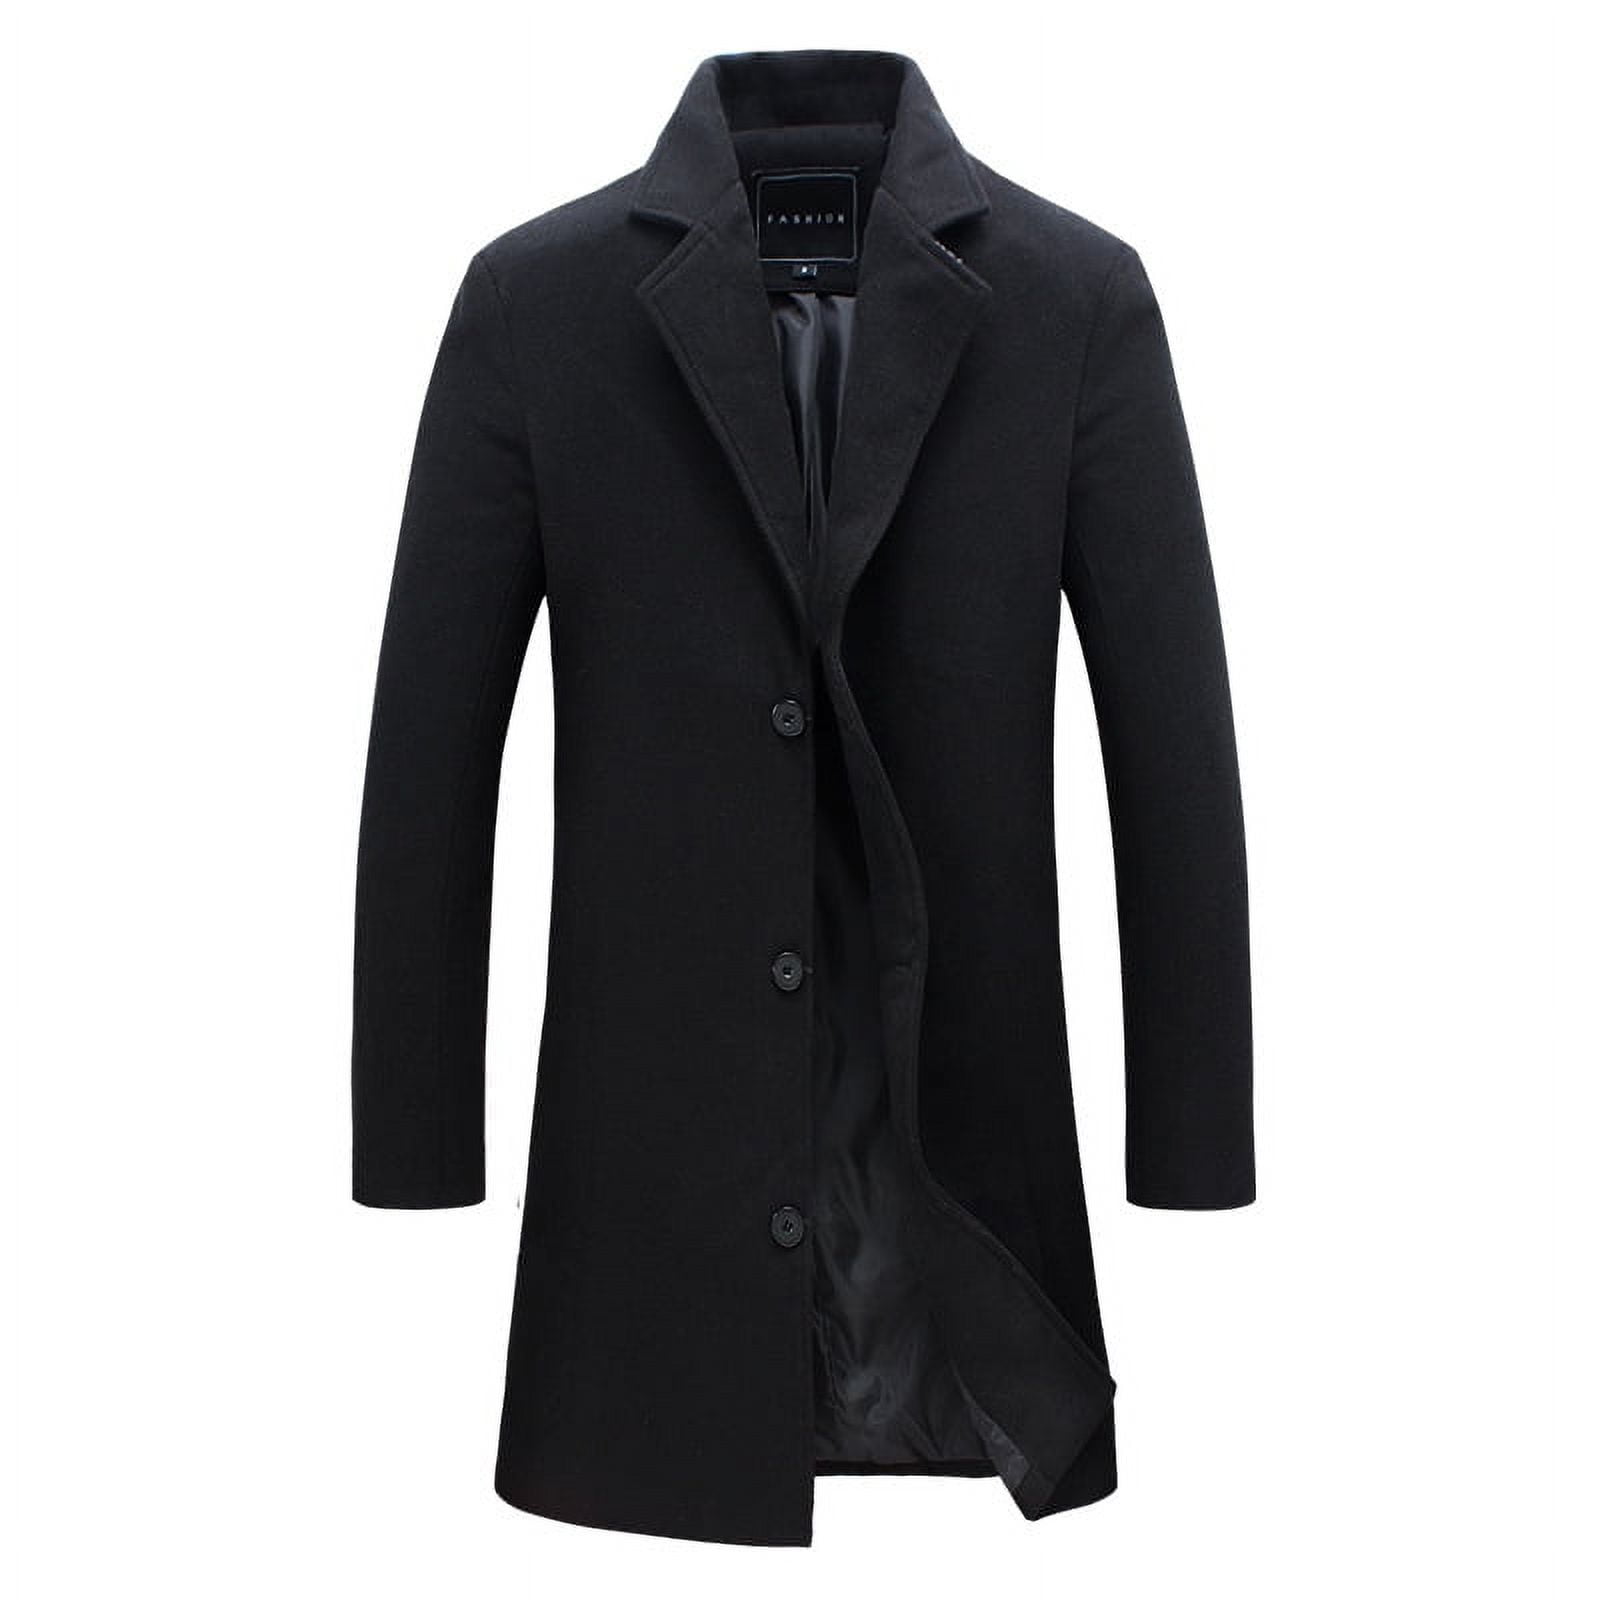 Musuos Mens Woolen Mid-Length Jacket Coat, Business Style Jacket Trench ...